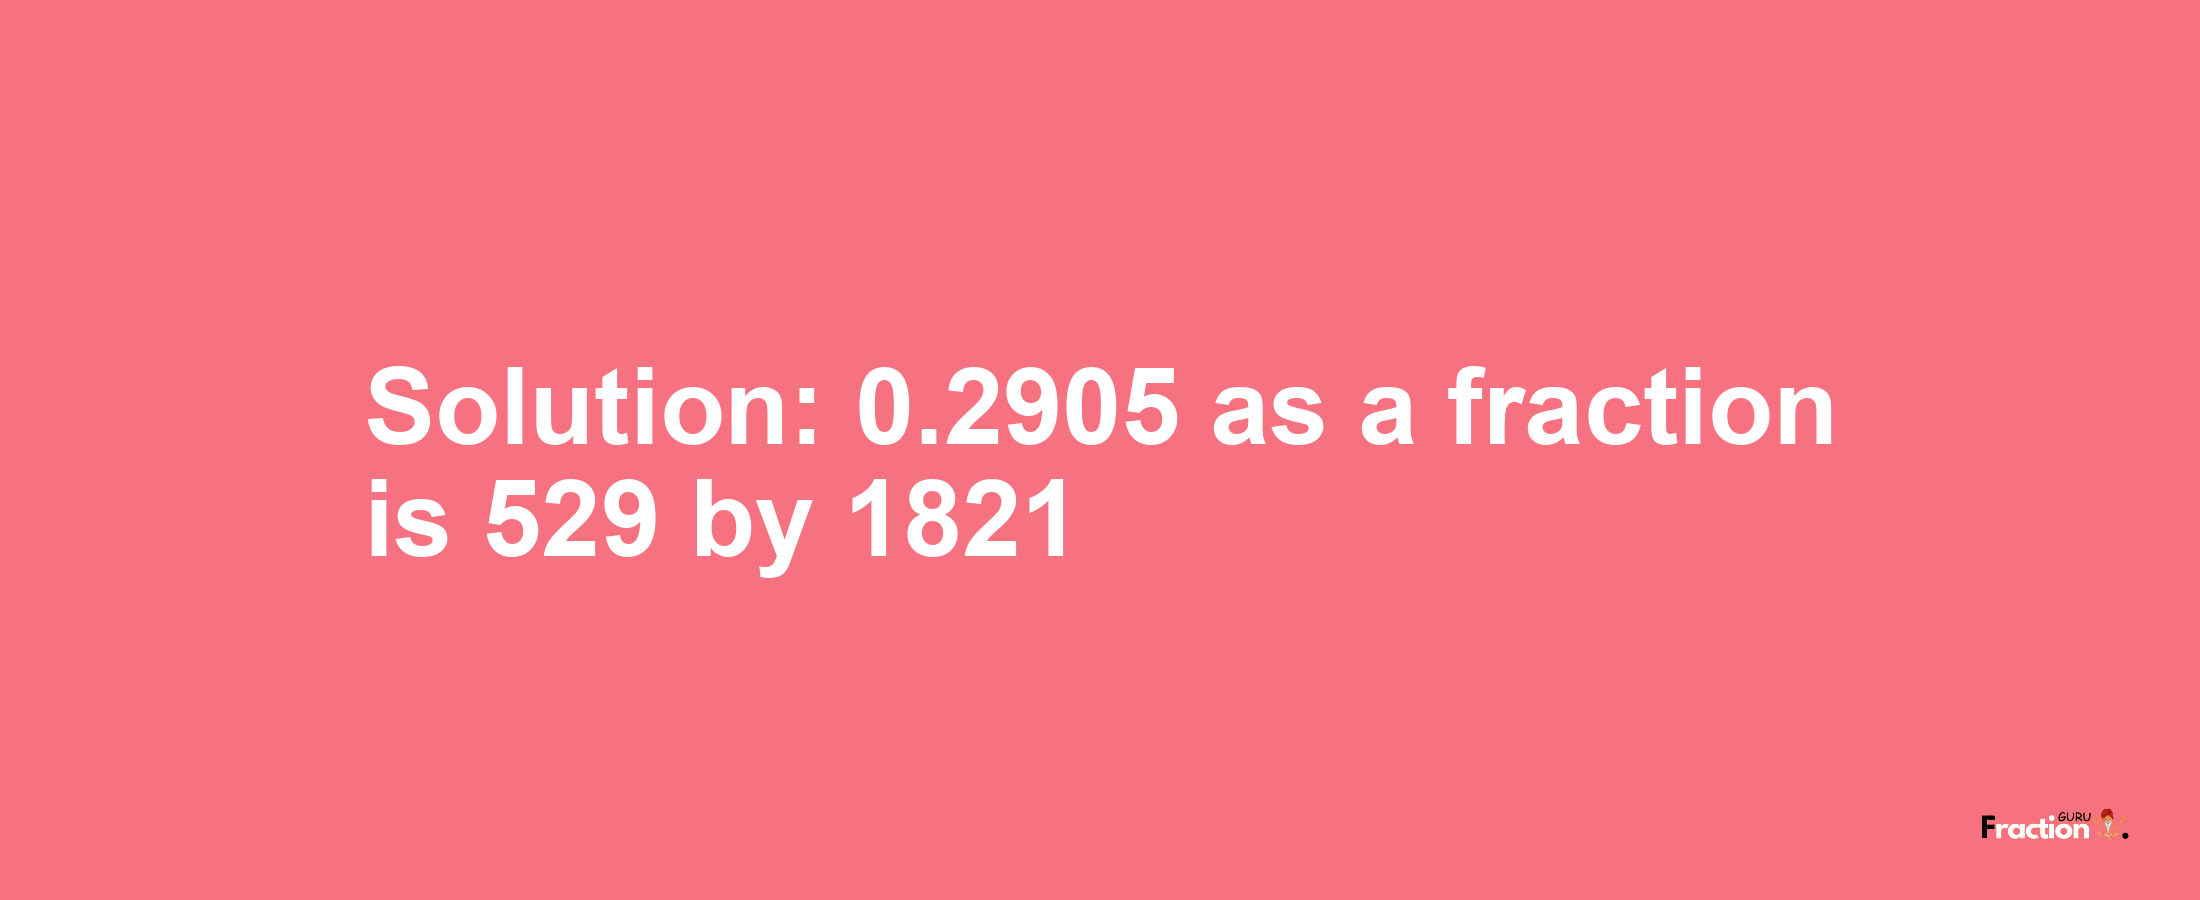 Solution:0.2905 as a fraction is 529/1821